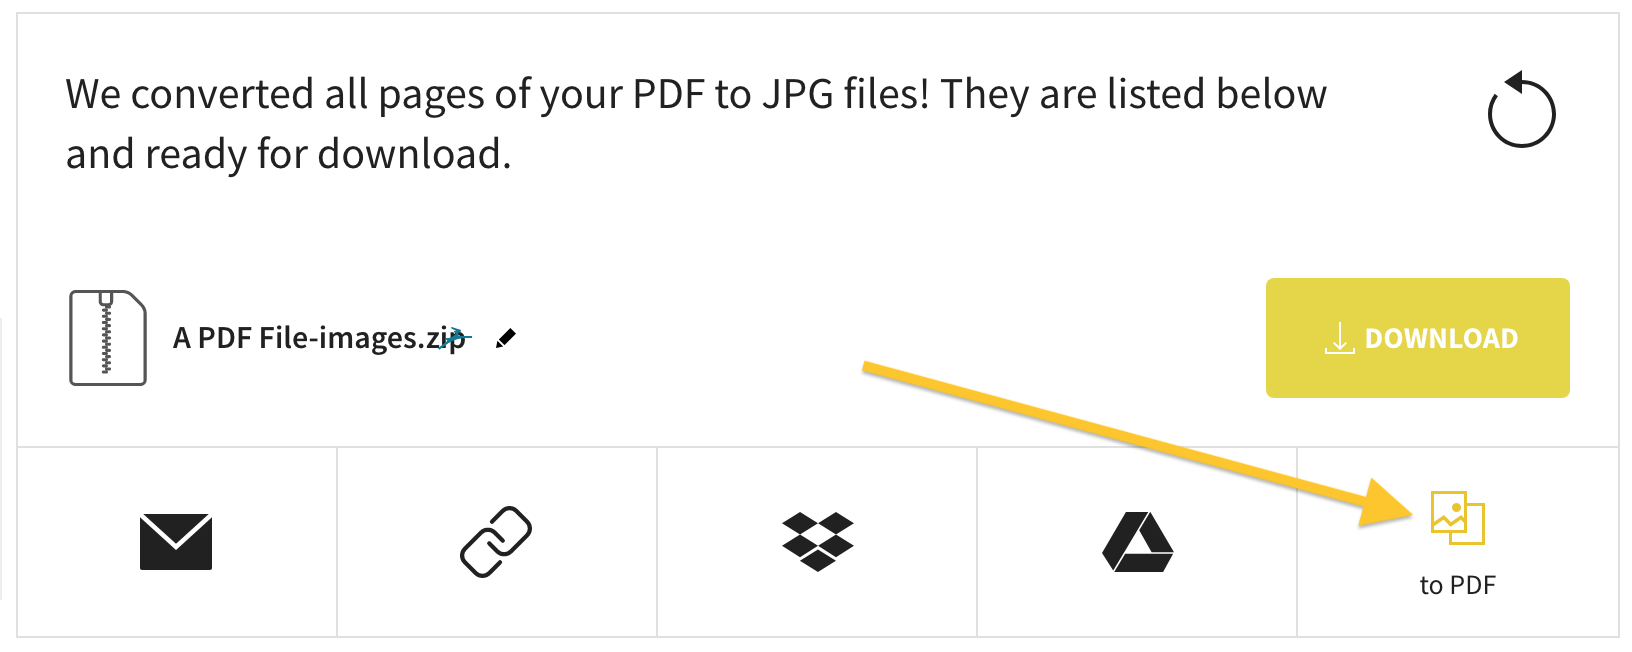 converse online your pdf files